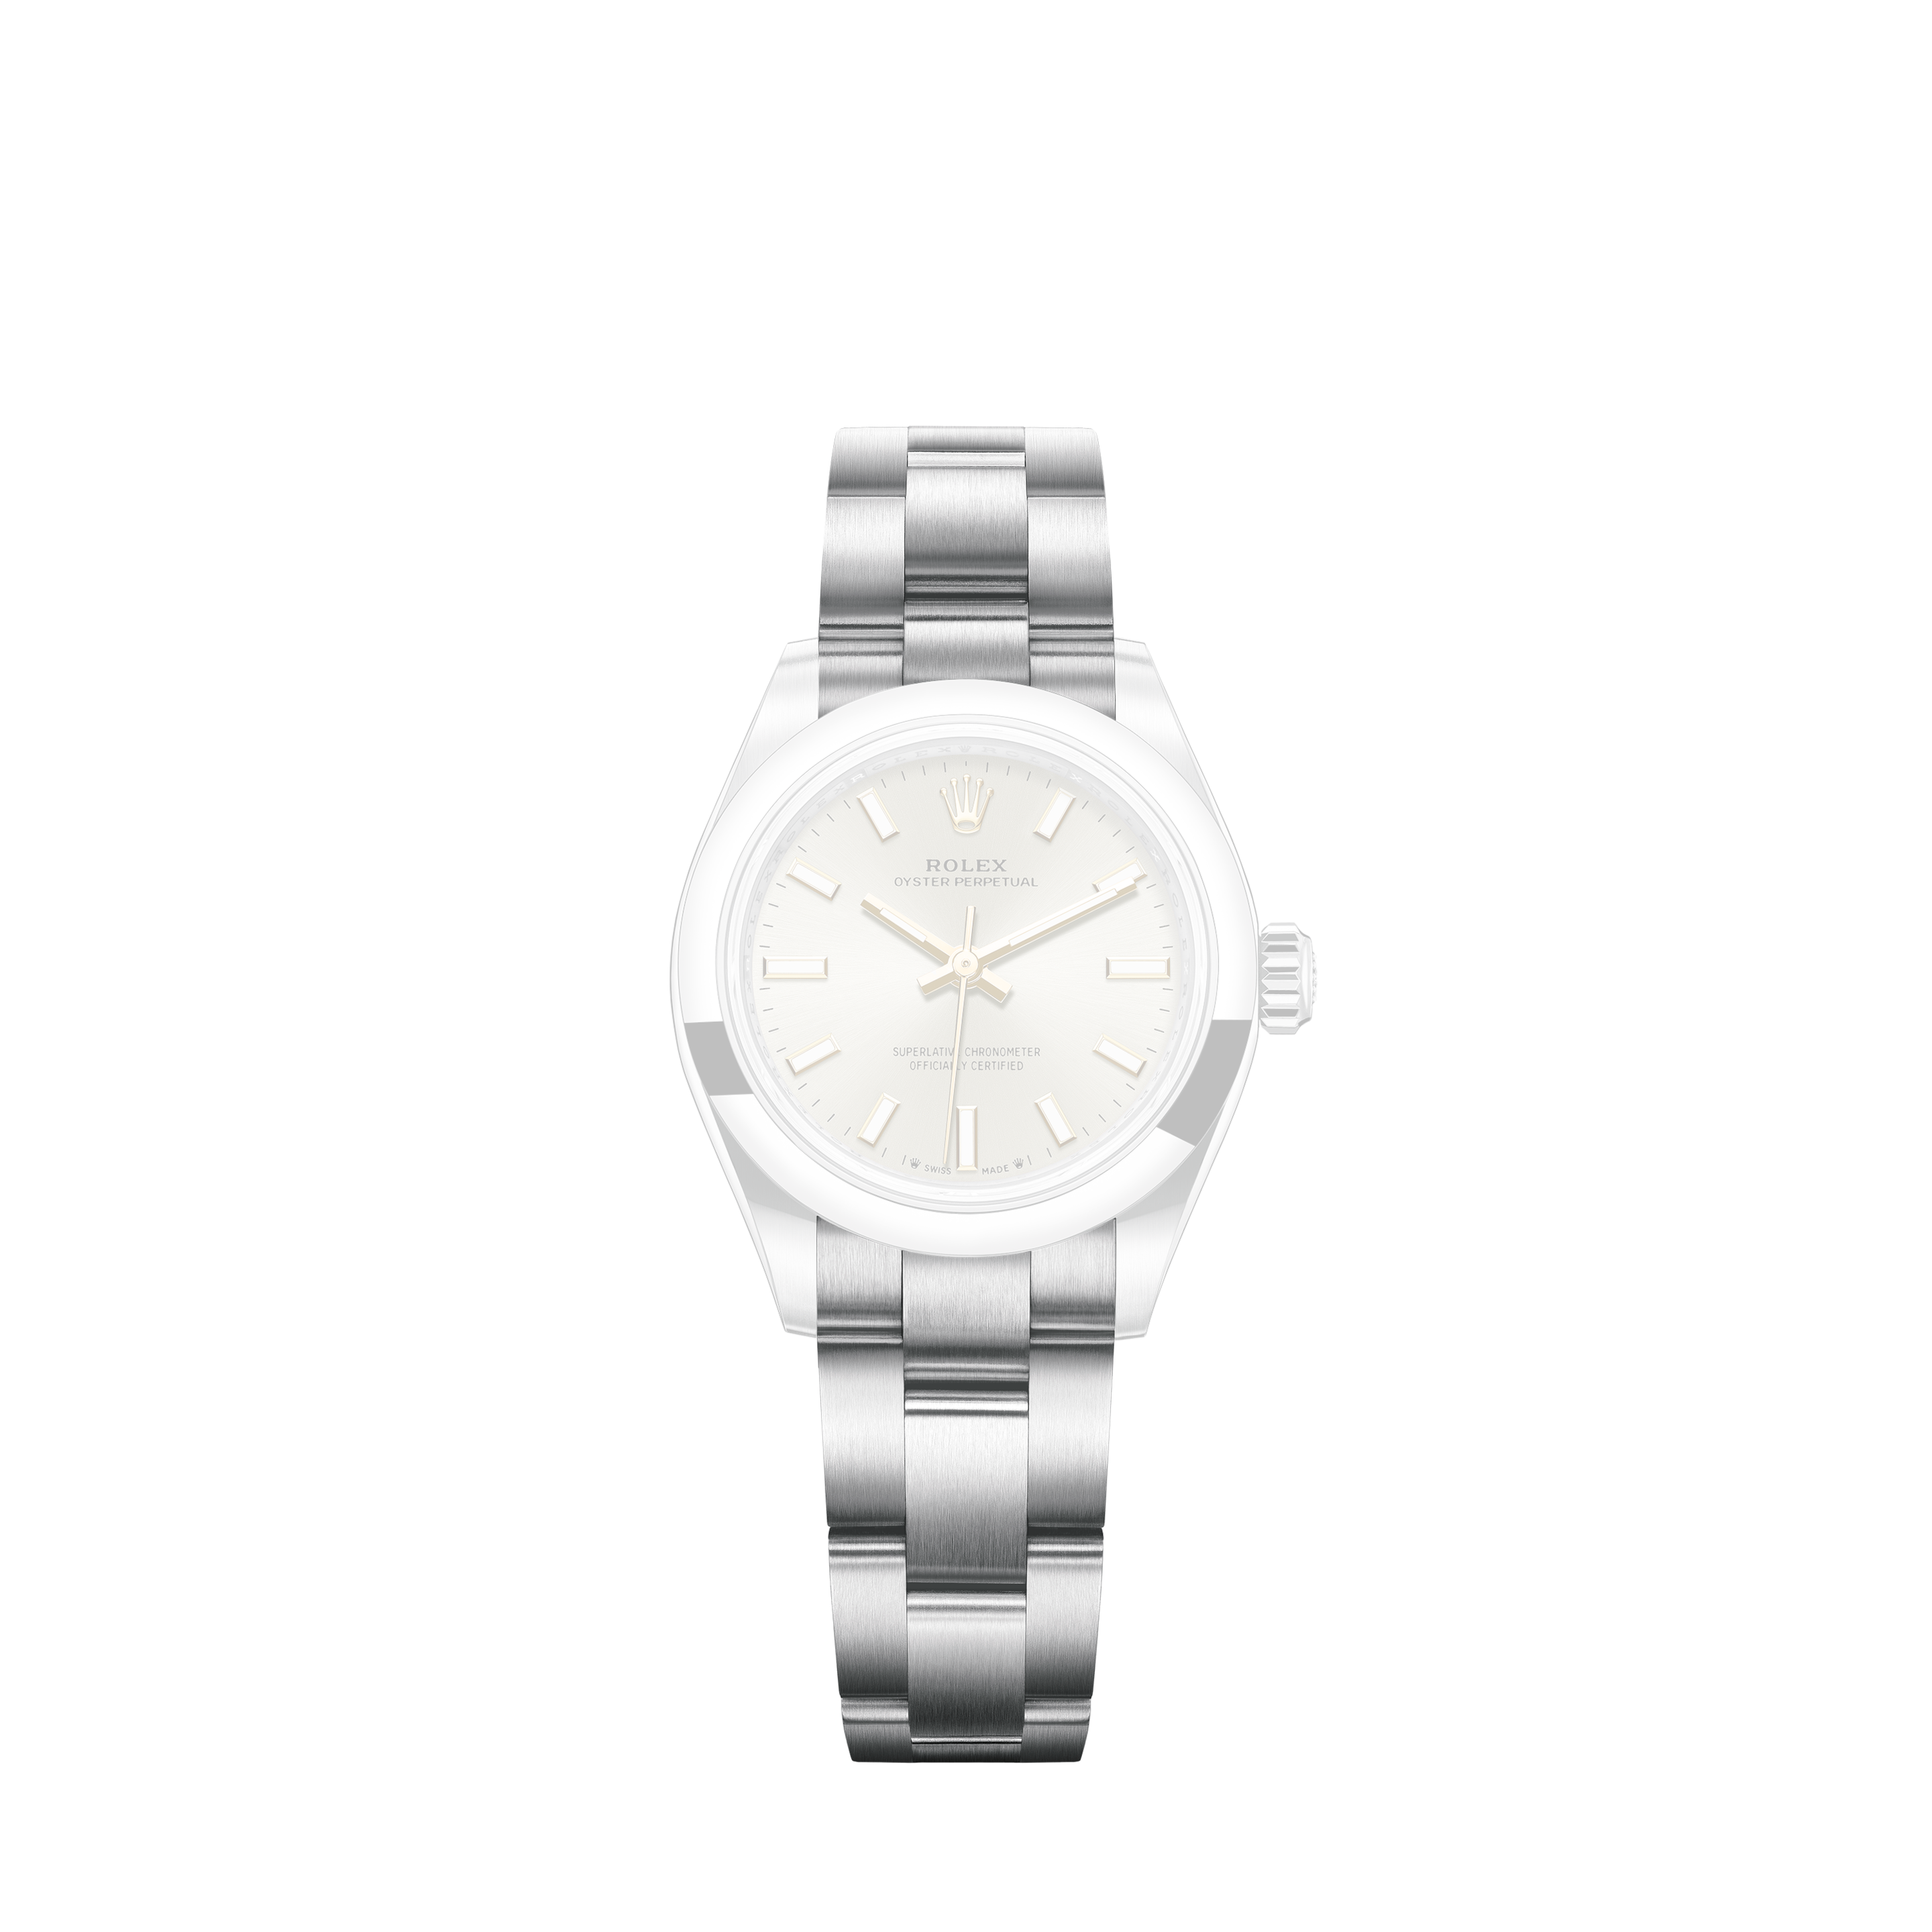 Rolex Datejust 41mm 126334 Oyster Steel White Gold Fluted Bezel-White Roman Dial